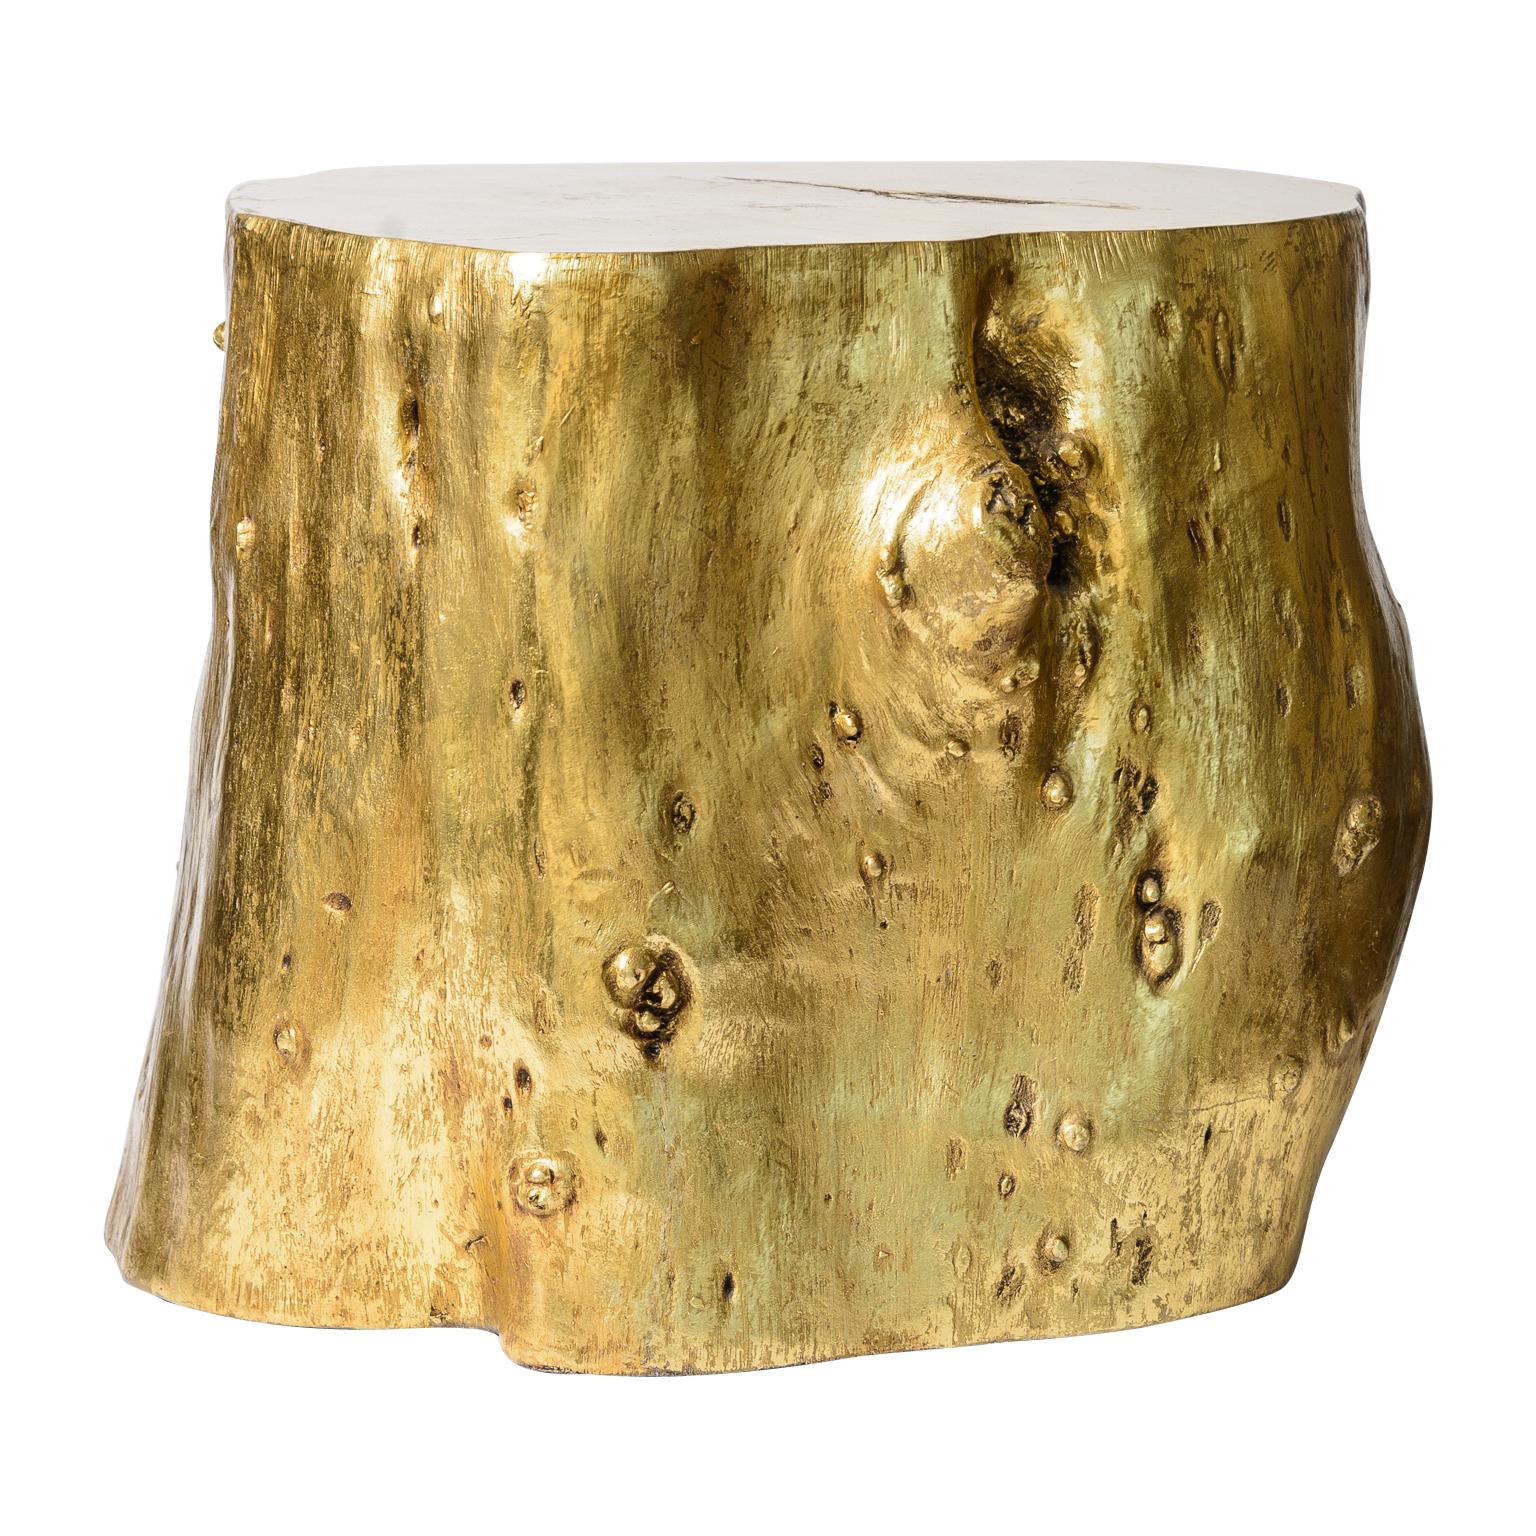 Set of two modern Tree Trunk Stumps made of cast resin and gold leafed.
This set looks very real and is not as heavy as wood. these are very versatile, could be used as tables or stools.
Very good preowned condition, consistent with use.